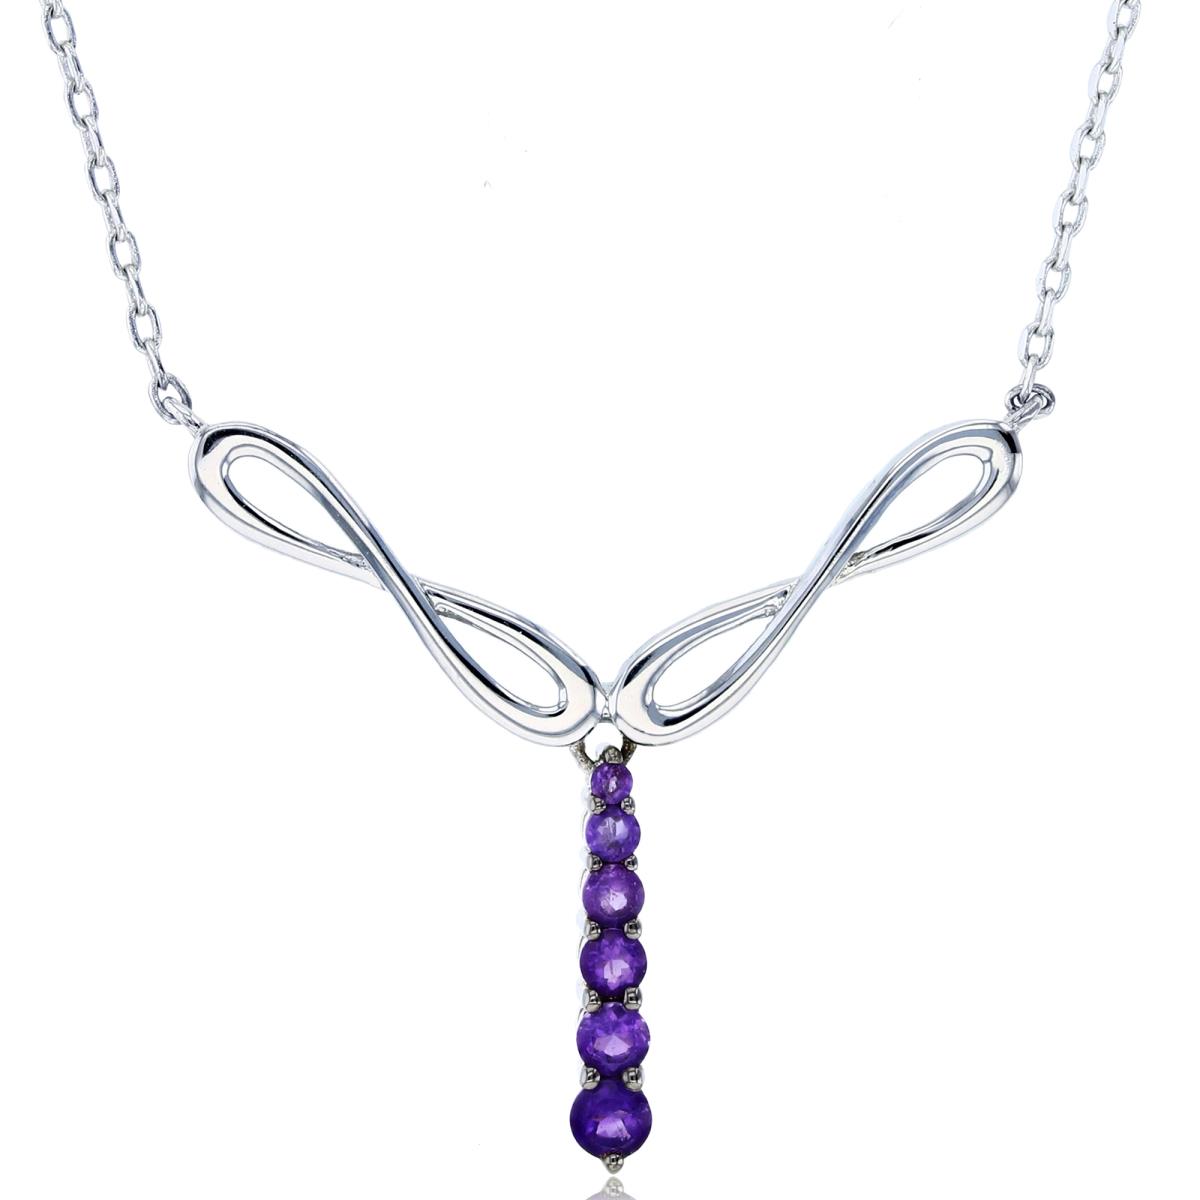 10K White Gold & Rd Amethyst Infiniti Graduated "Y" 16+2" Necklace